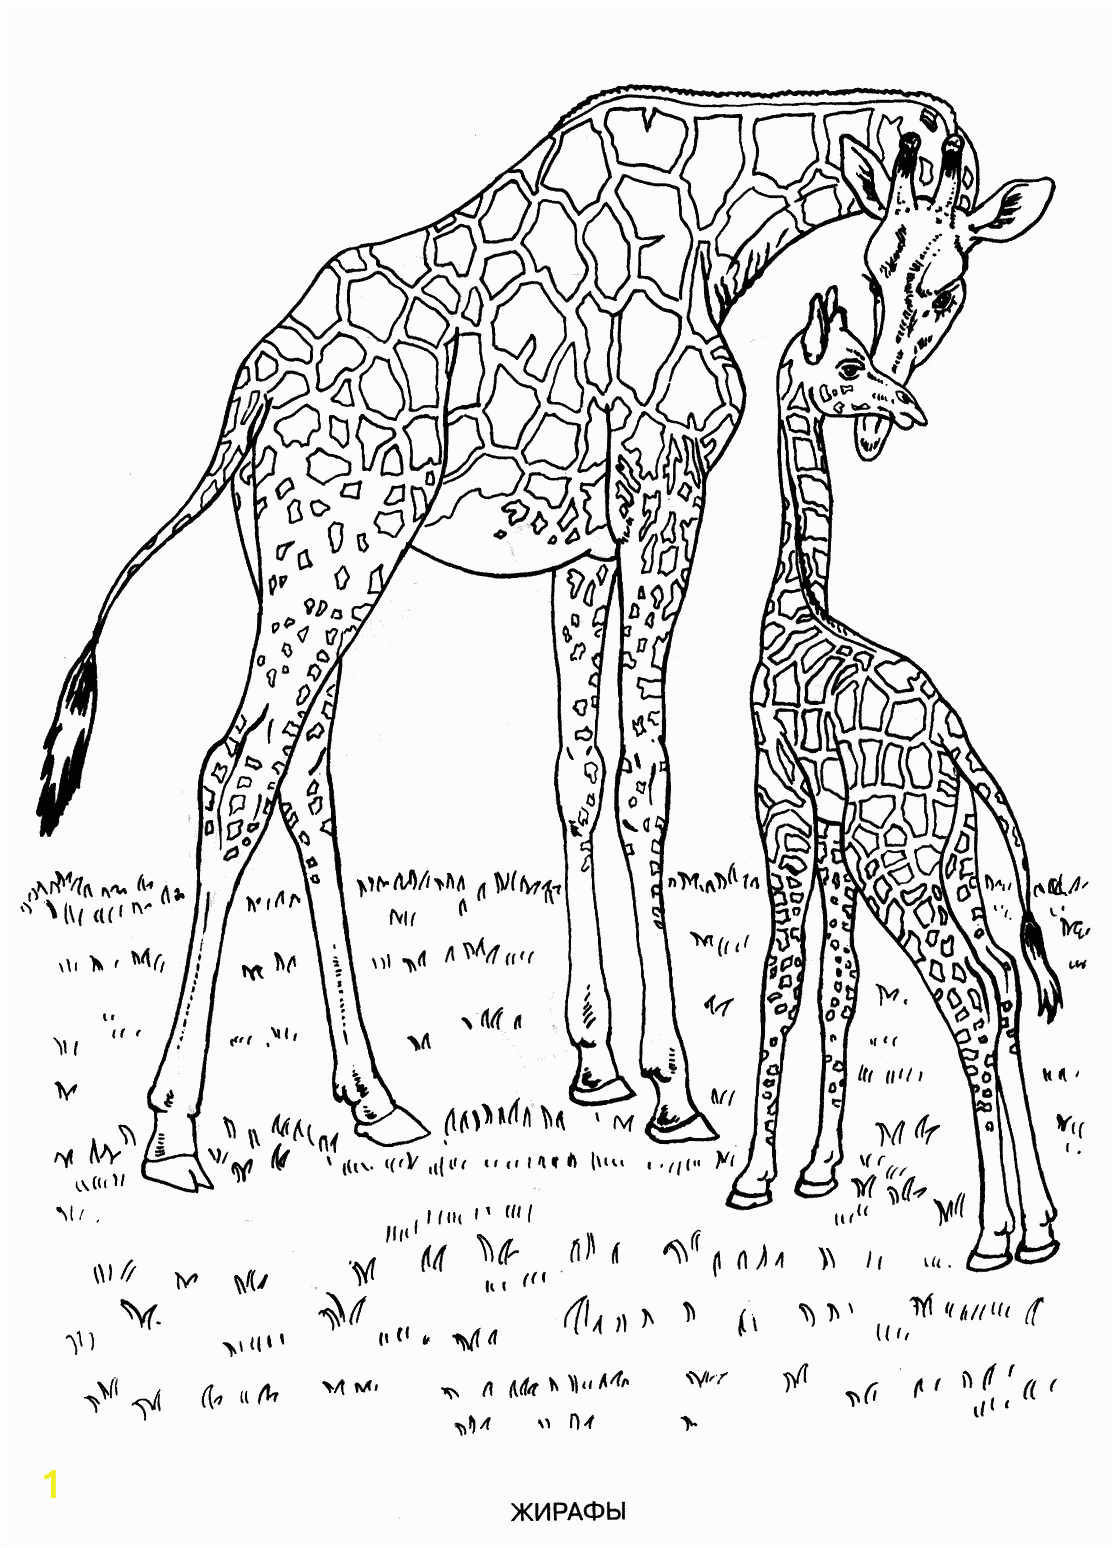 Wild Animal Coloring Pages for Kids Wild Animals Coloring Pages for Kids to Print for Free